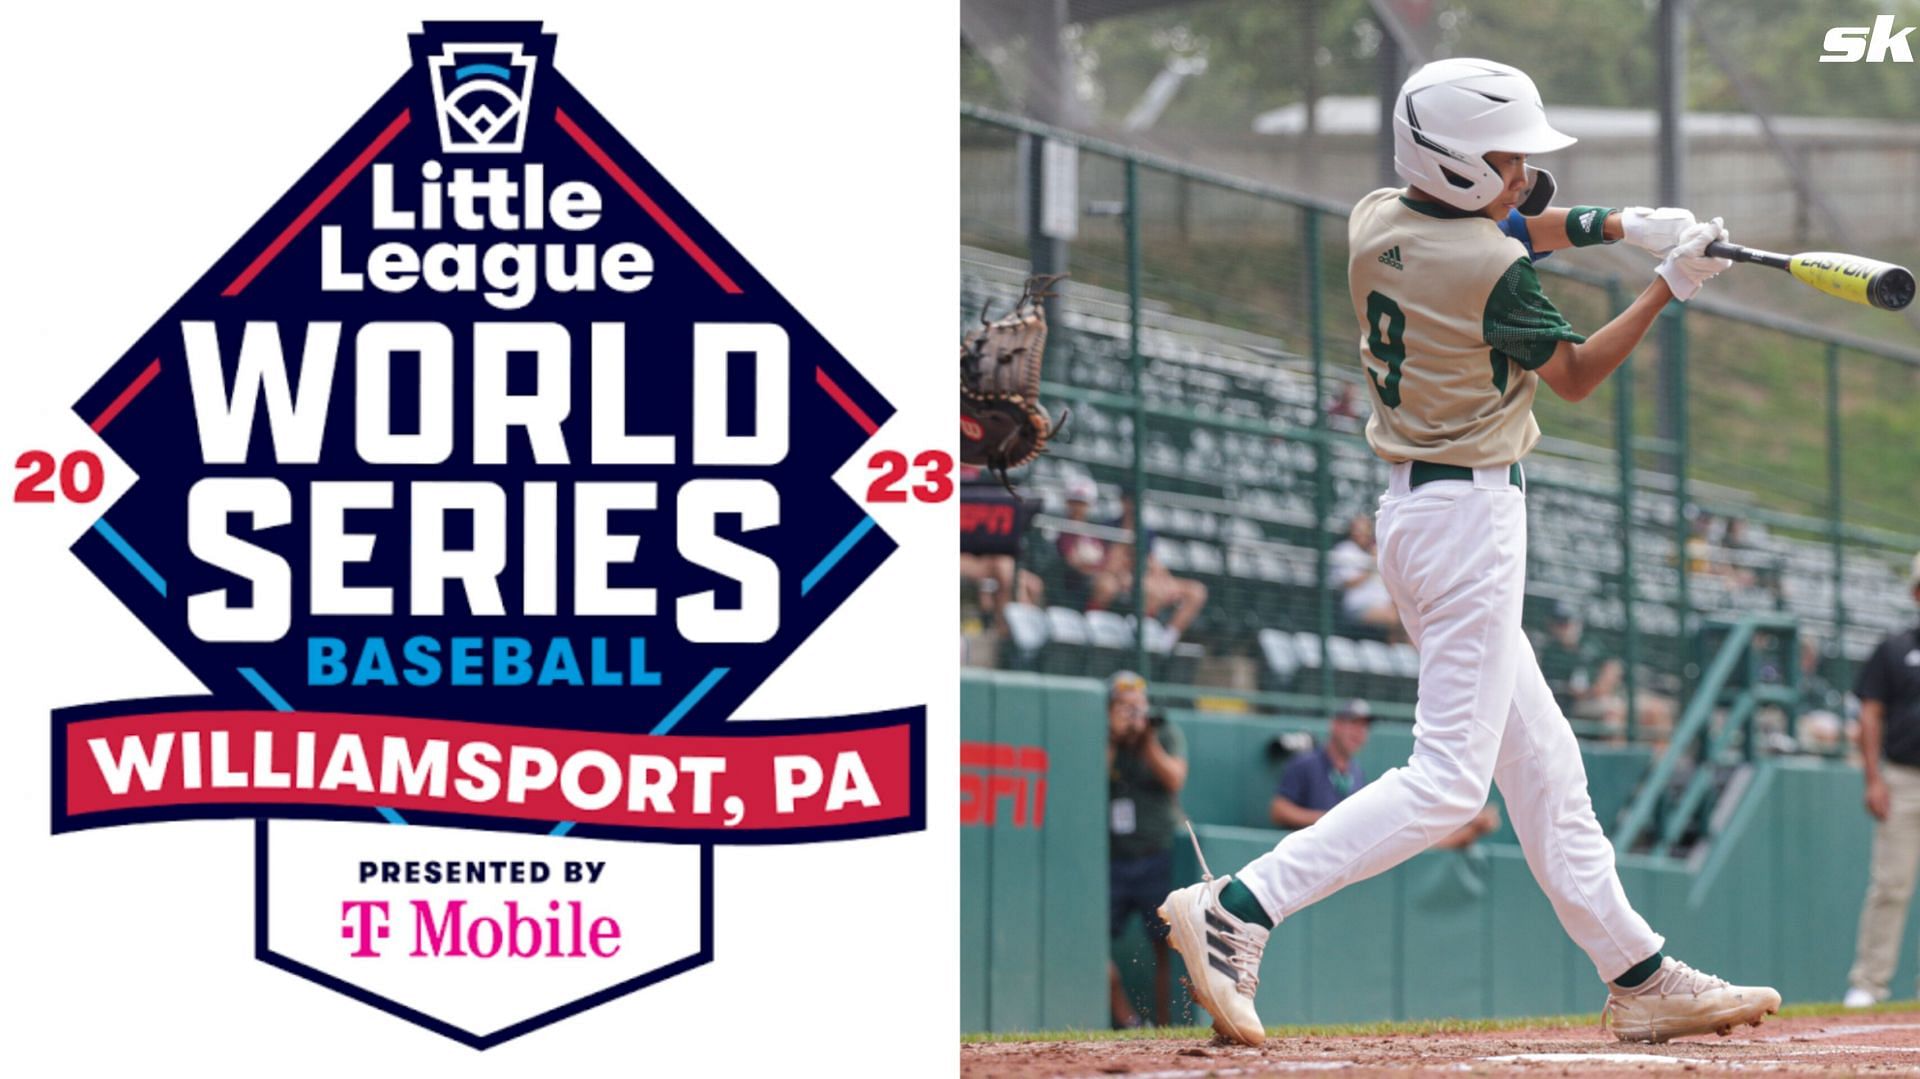 West vs Great Lakes Little League Baseball World Series 2023 Game 8